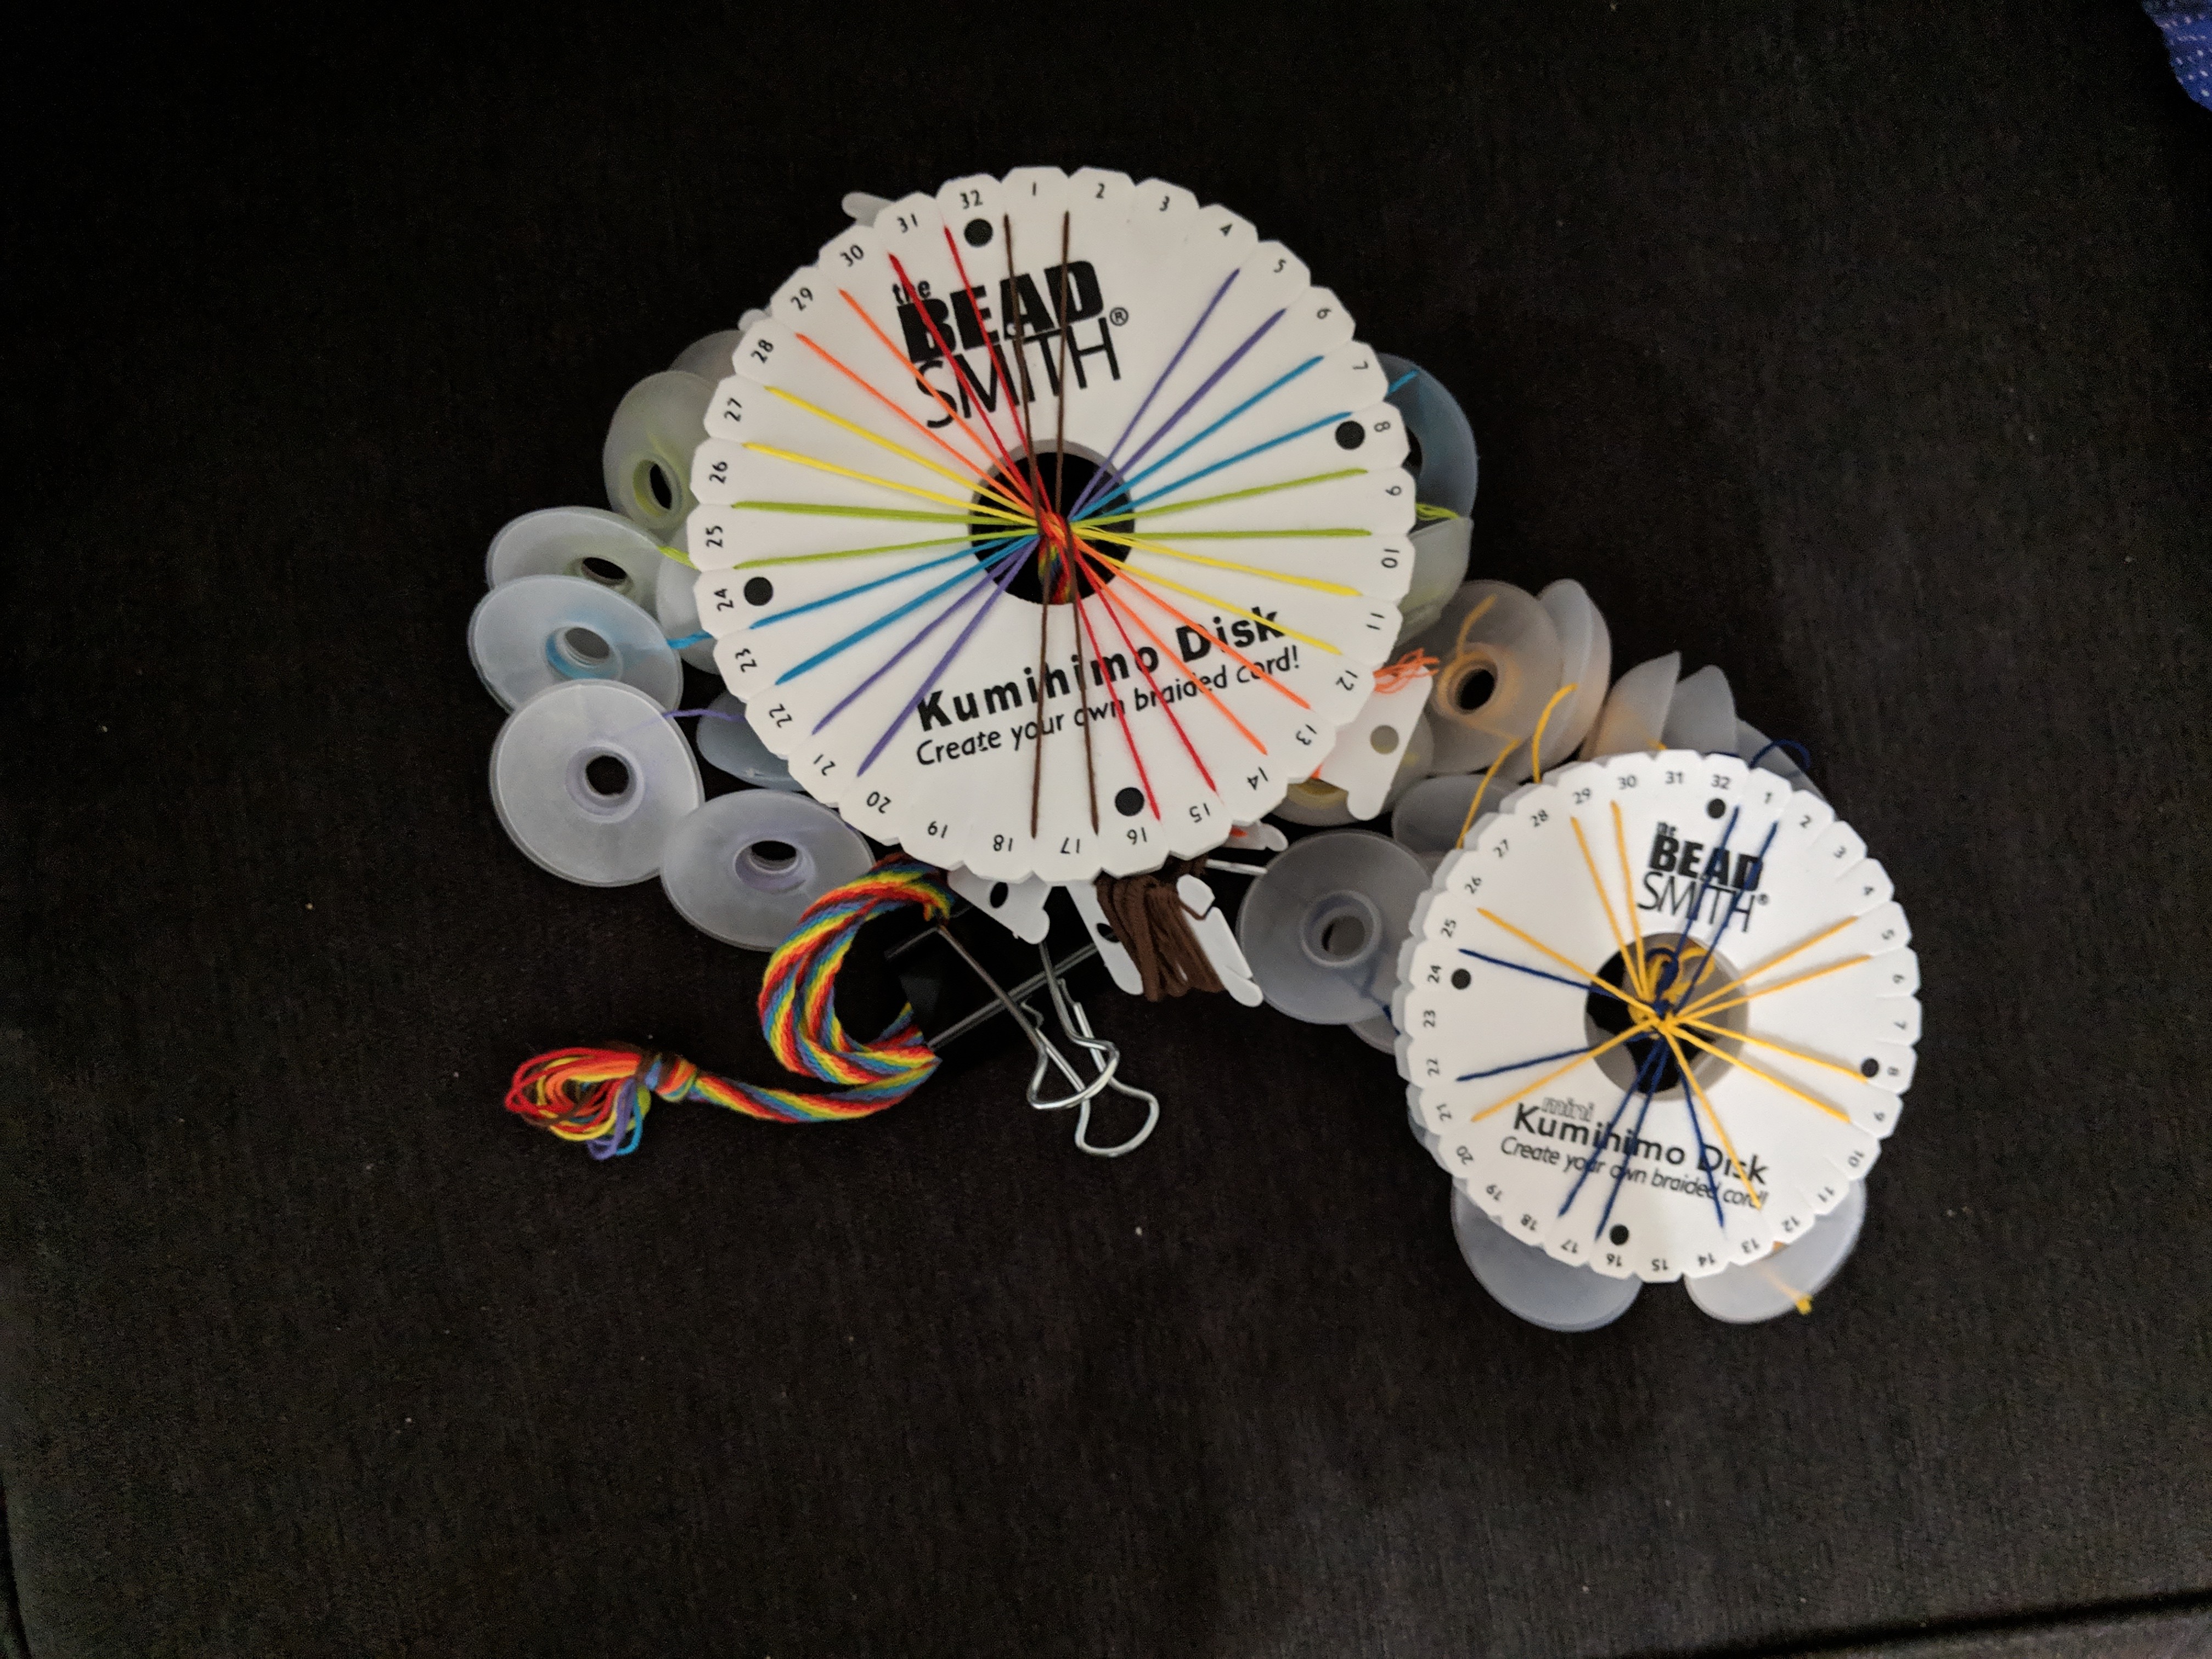 Picture of two kumihimo disks, one with rainbow braid, one with blue and yellow pattern.